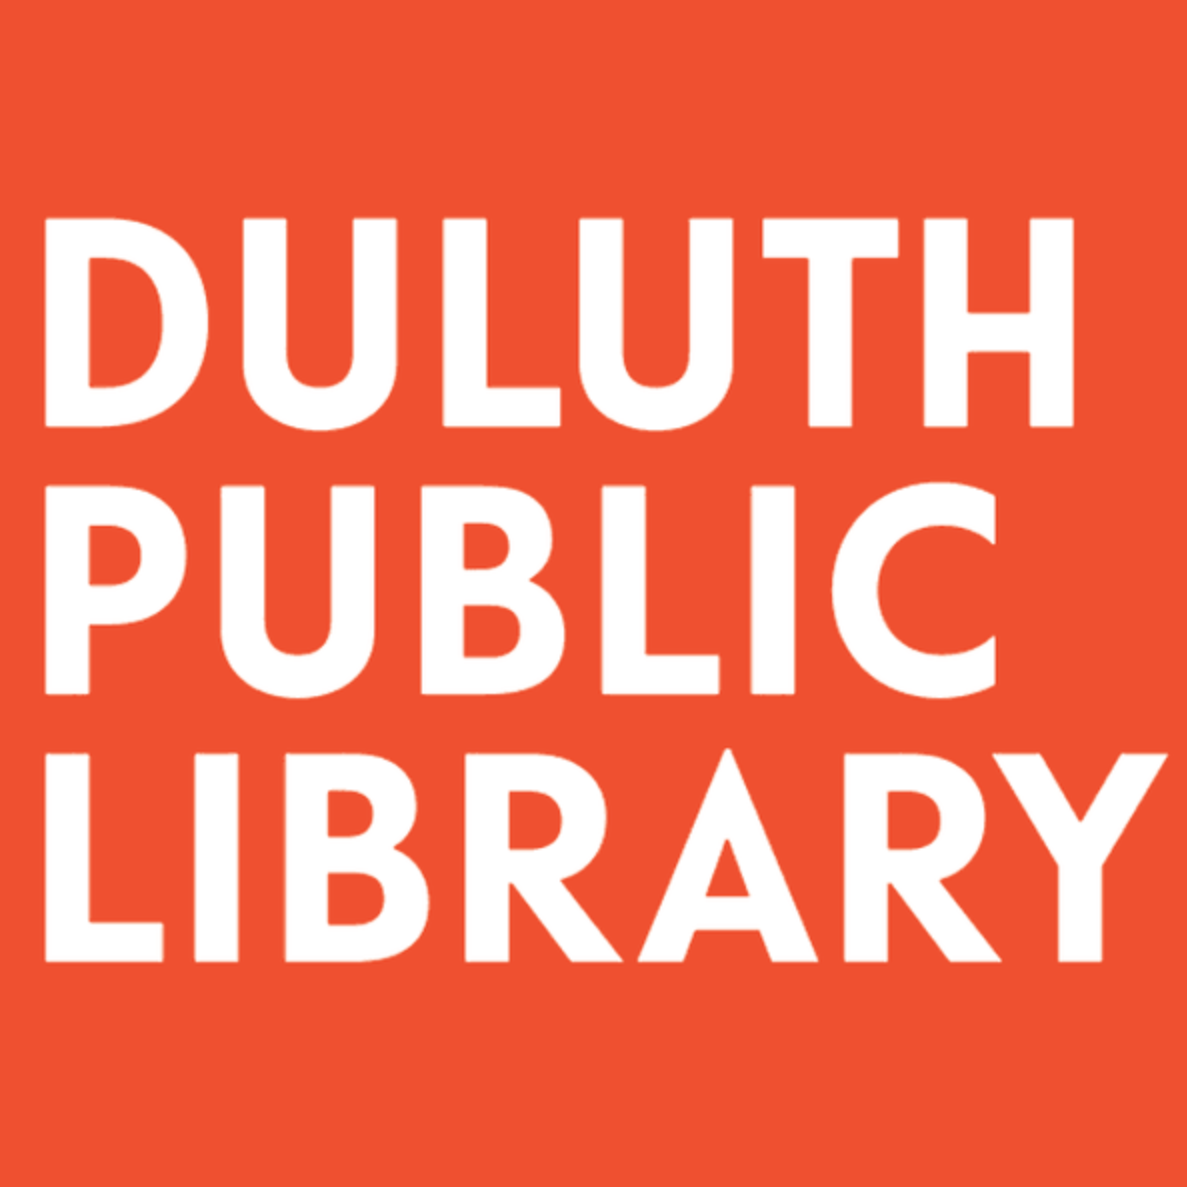 The logo for the Duluth Public Library.